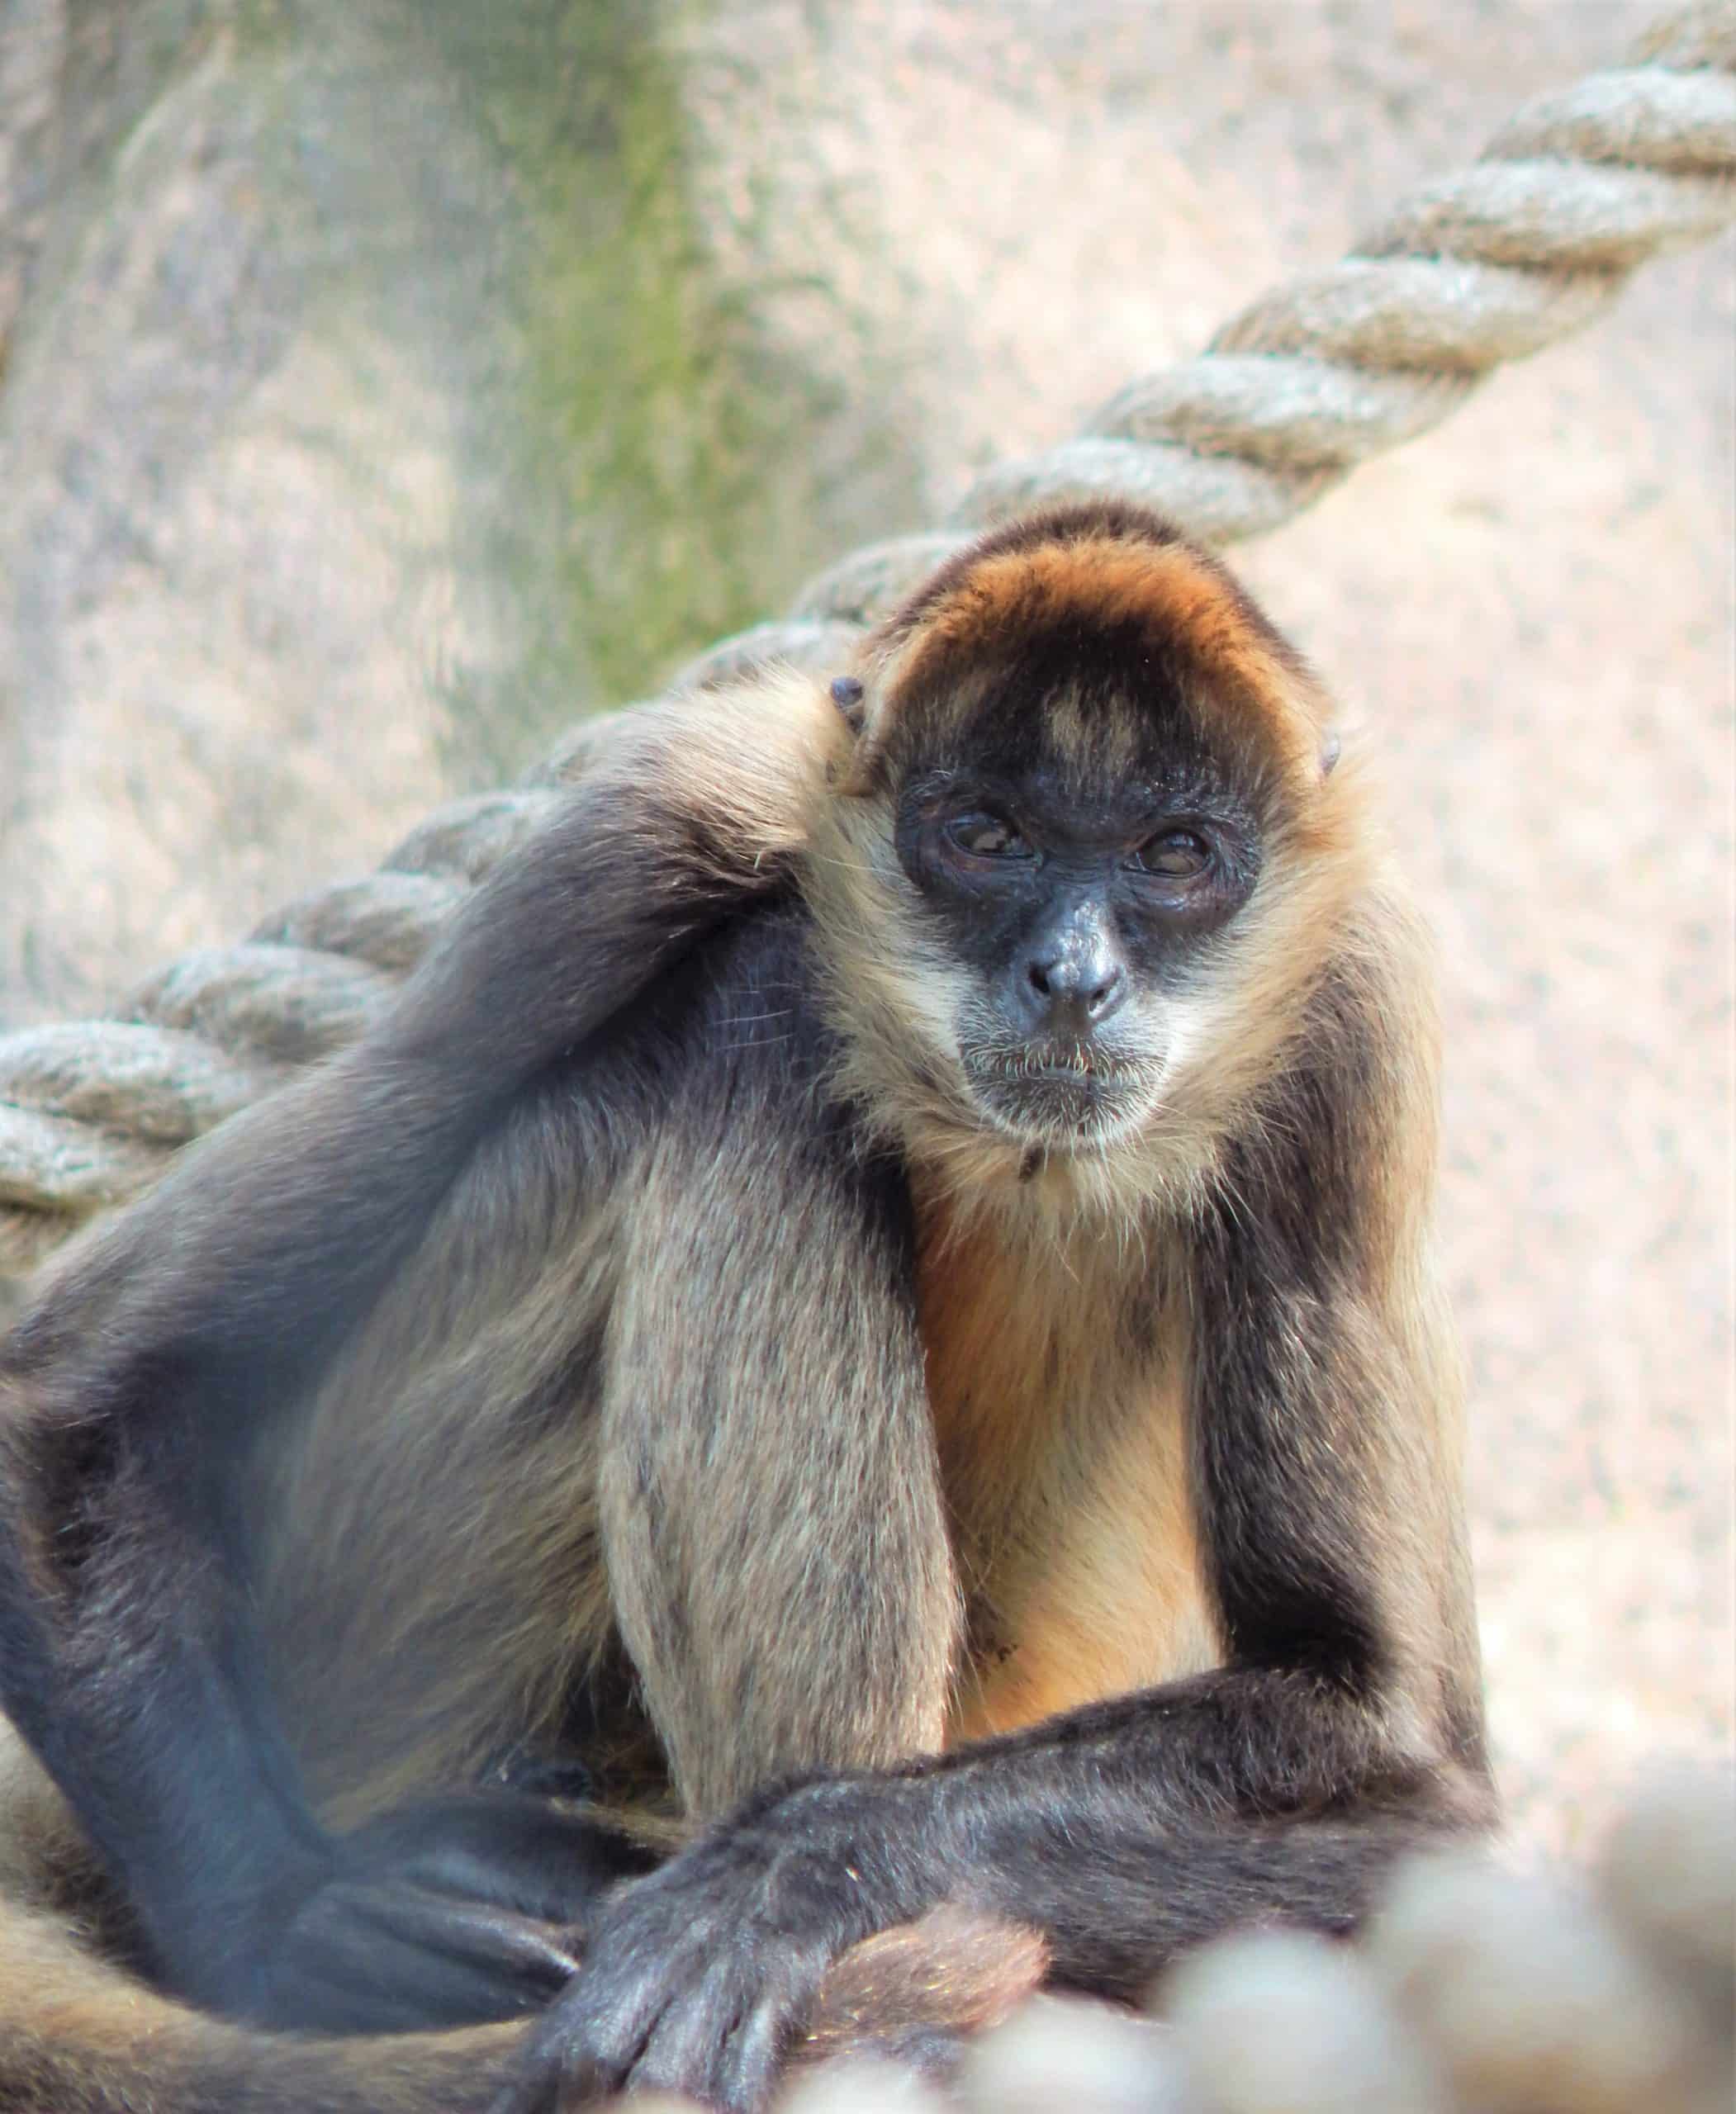 Spider monkeys, facts and photos